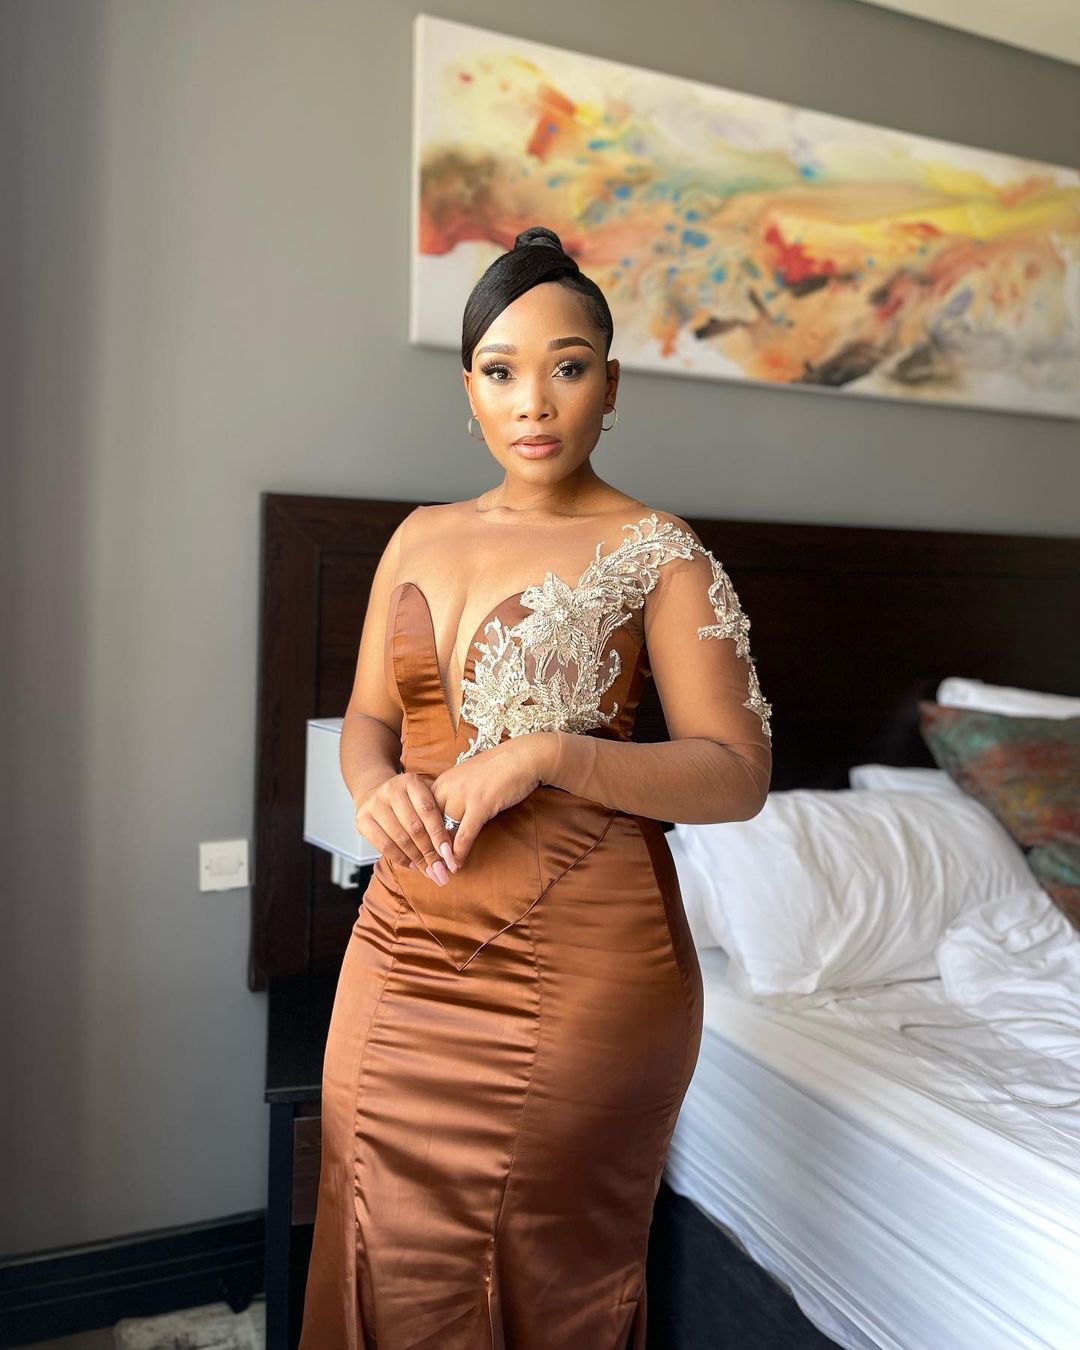 Sthoko Inno Sadiki From Skeem Saam Show Fans Her Soft Life The Pink Brain